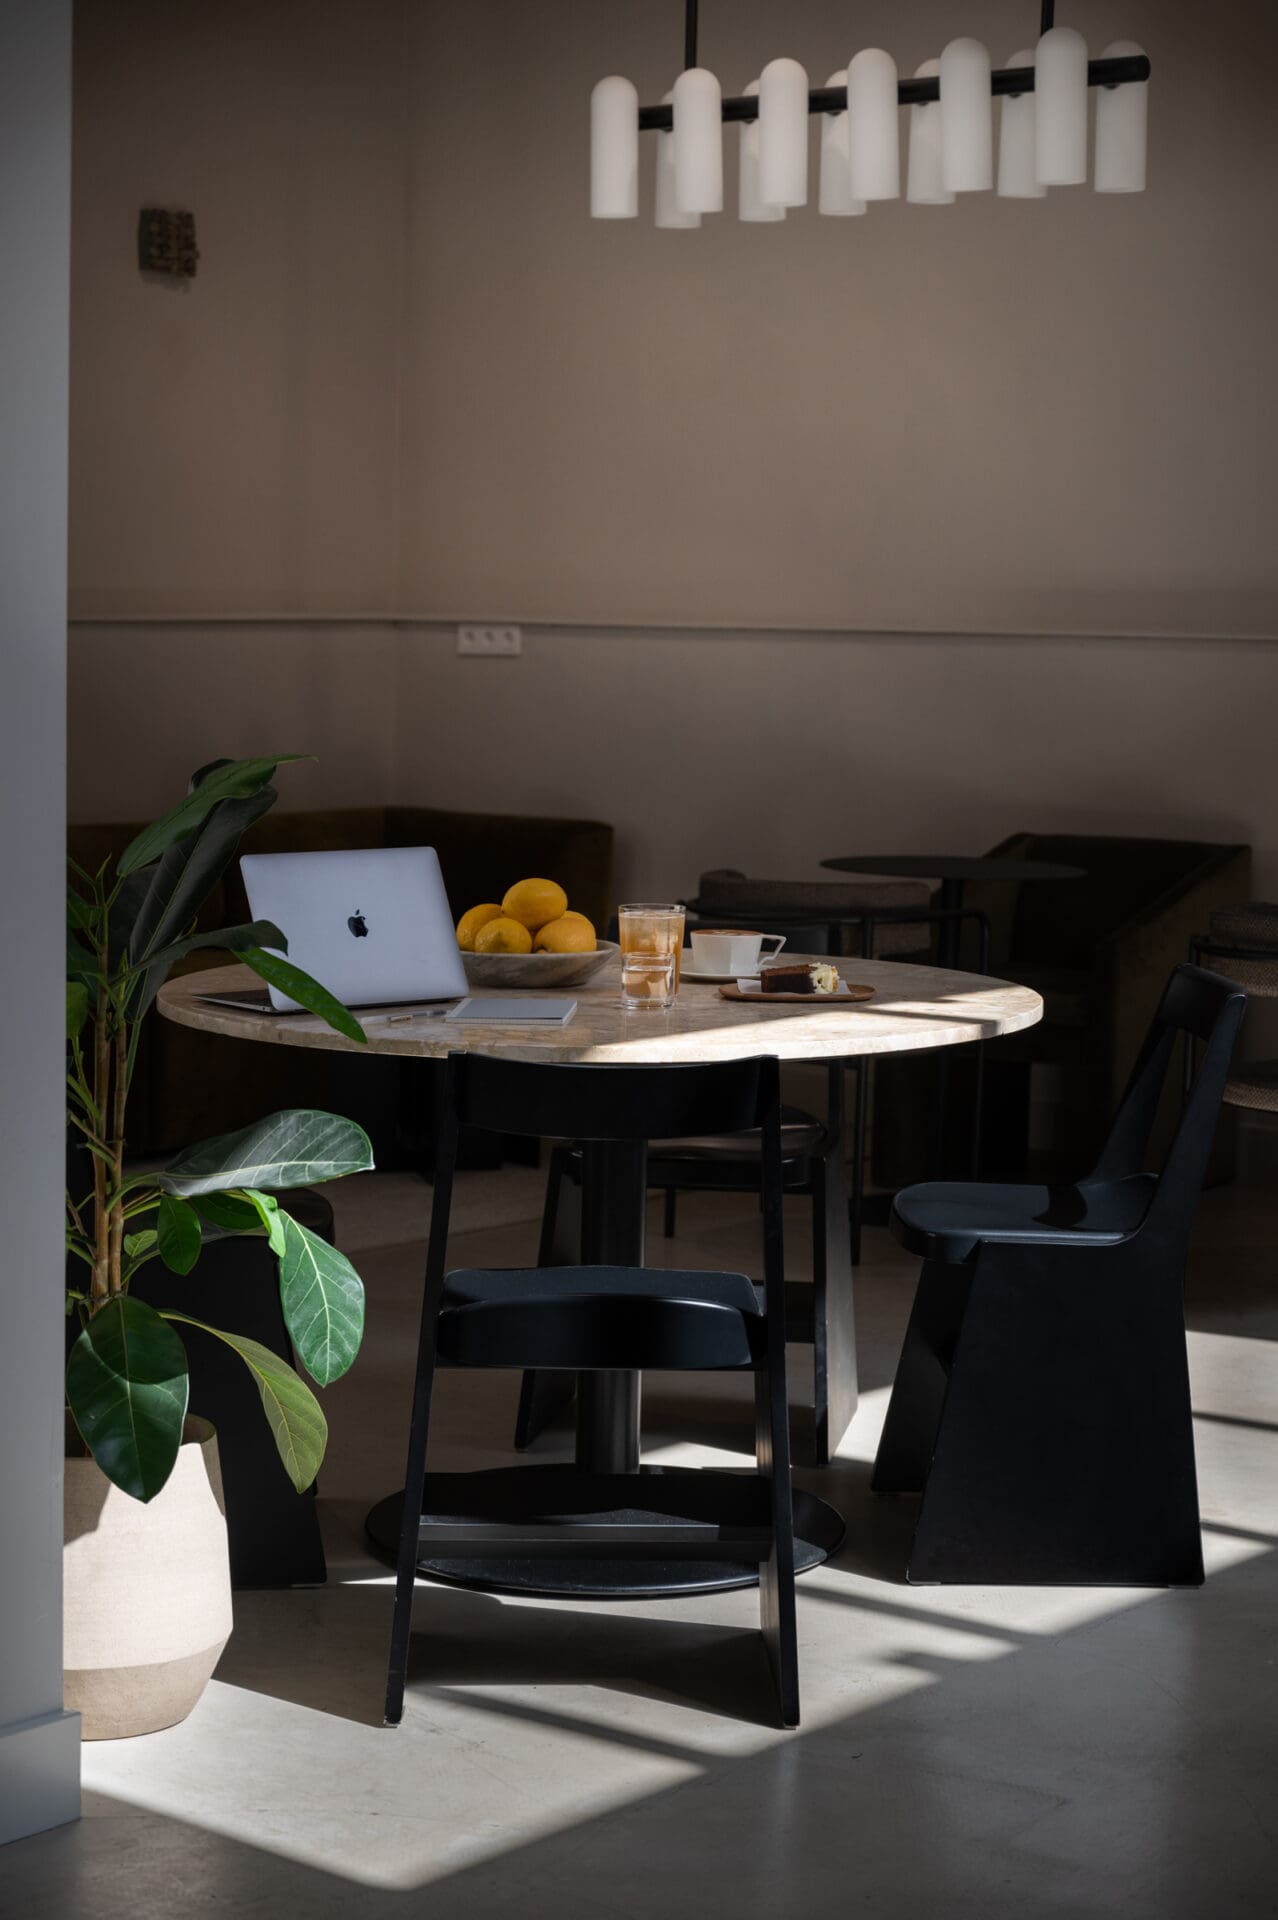 What are countries doing for digital nomads? A laptop on a table, co-working in Amsterdam